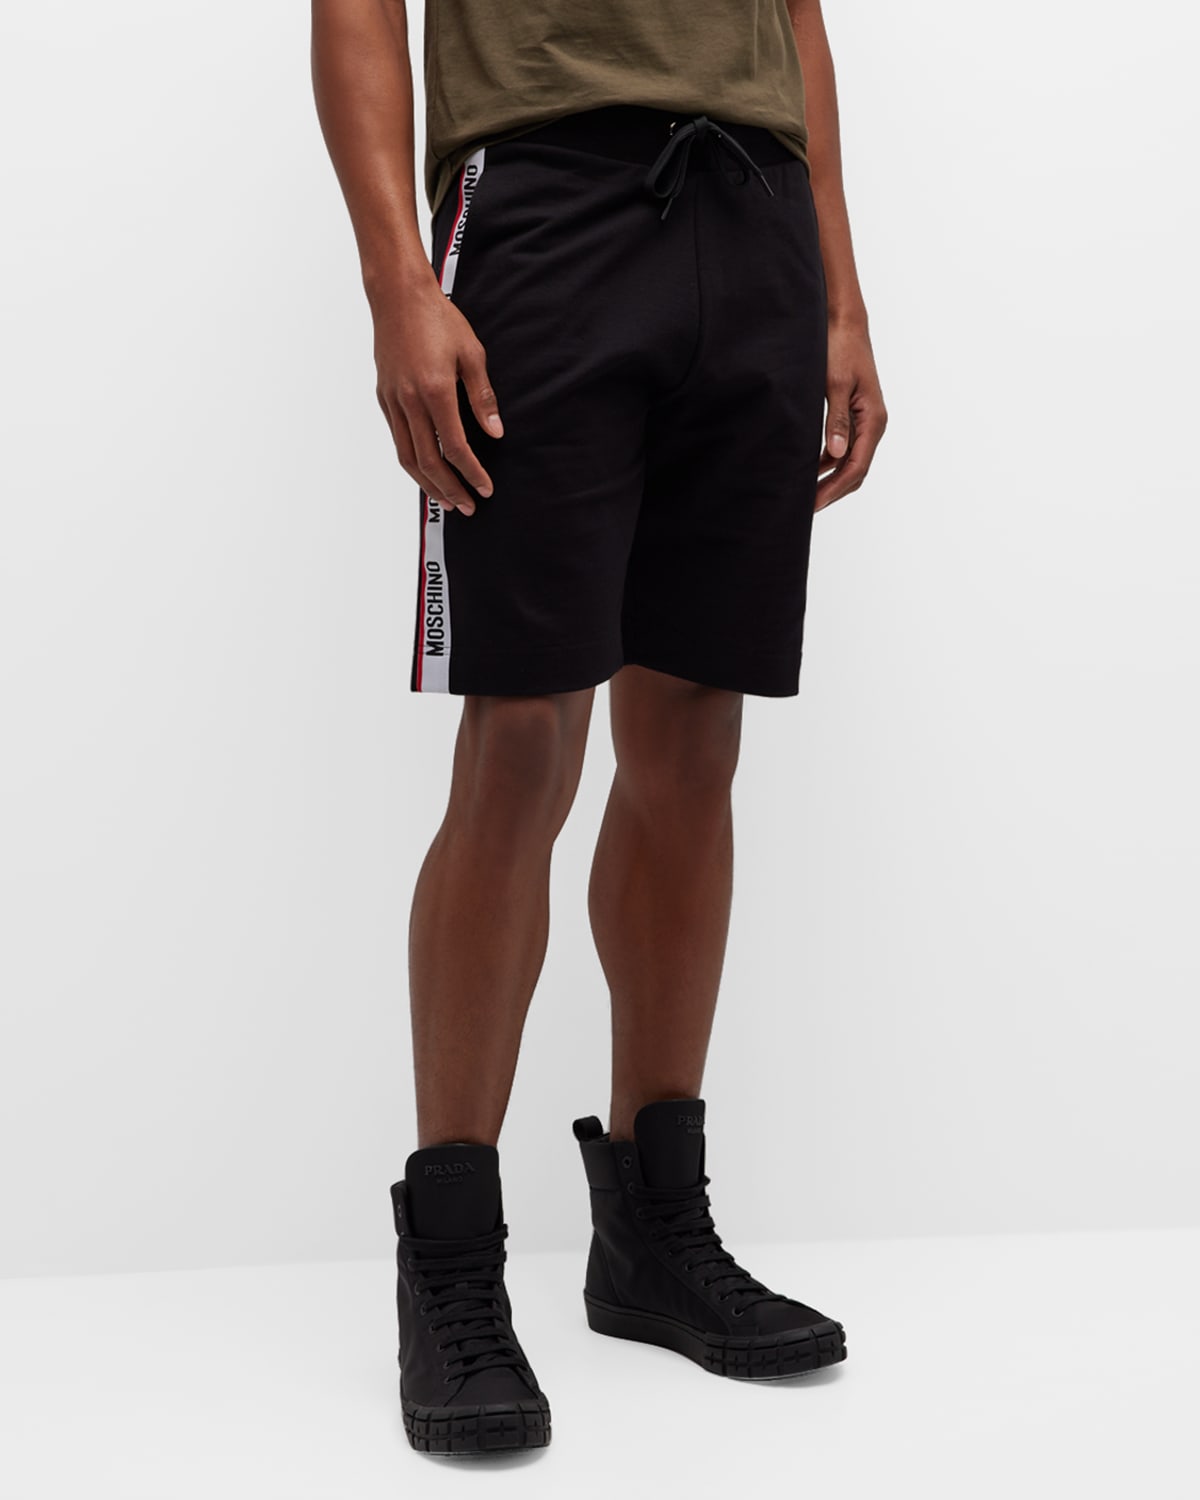 Moschino Men's Athletic Shorts With Side Taping In Black